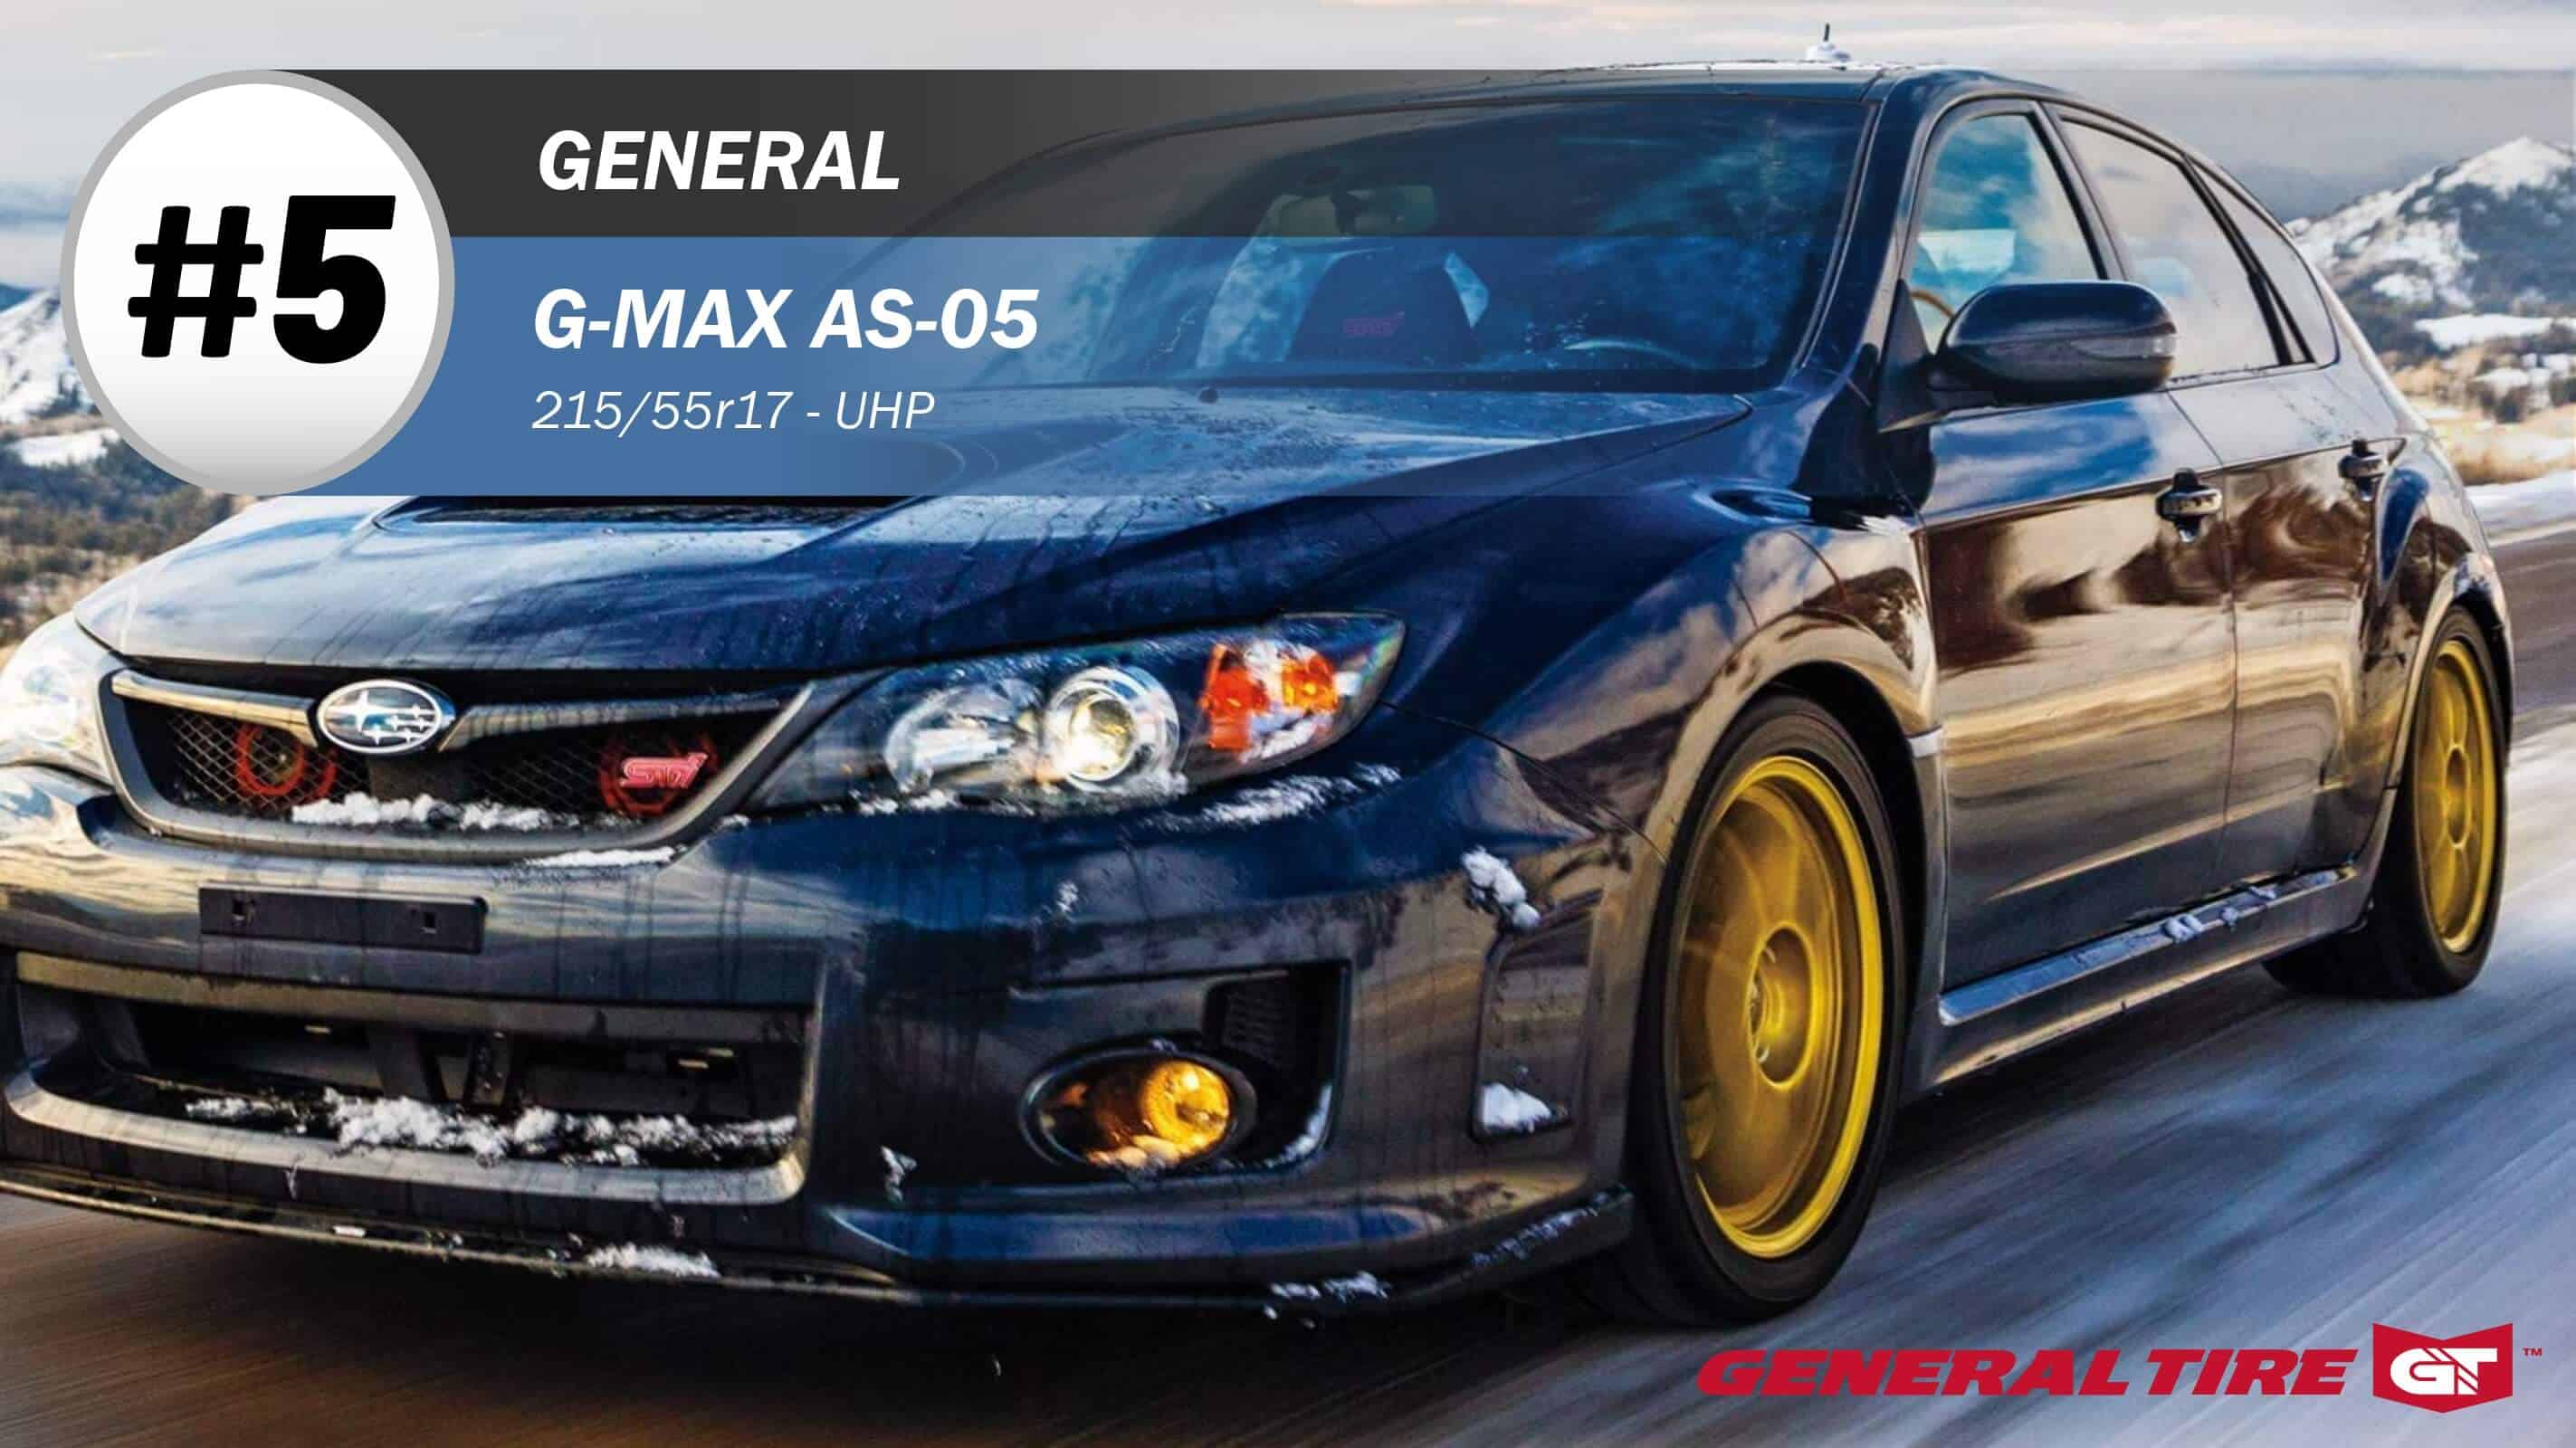 Top #5 UHP Tires: General G-Max AS-05 – 215/55r17